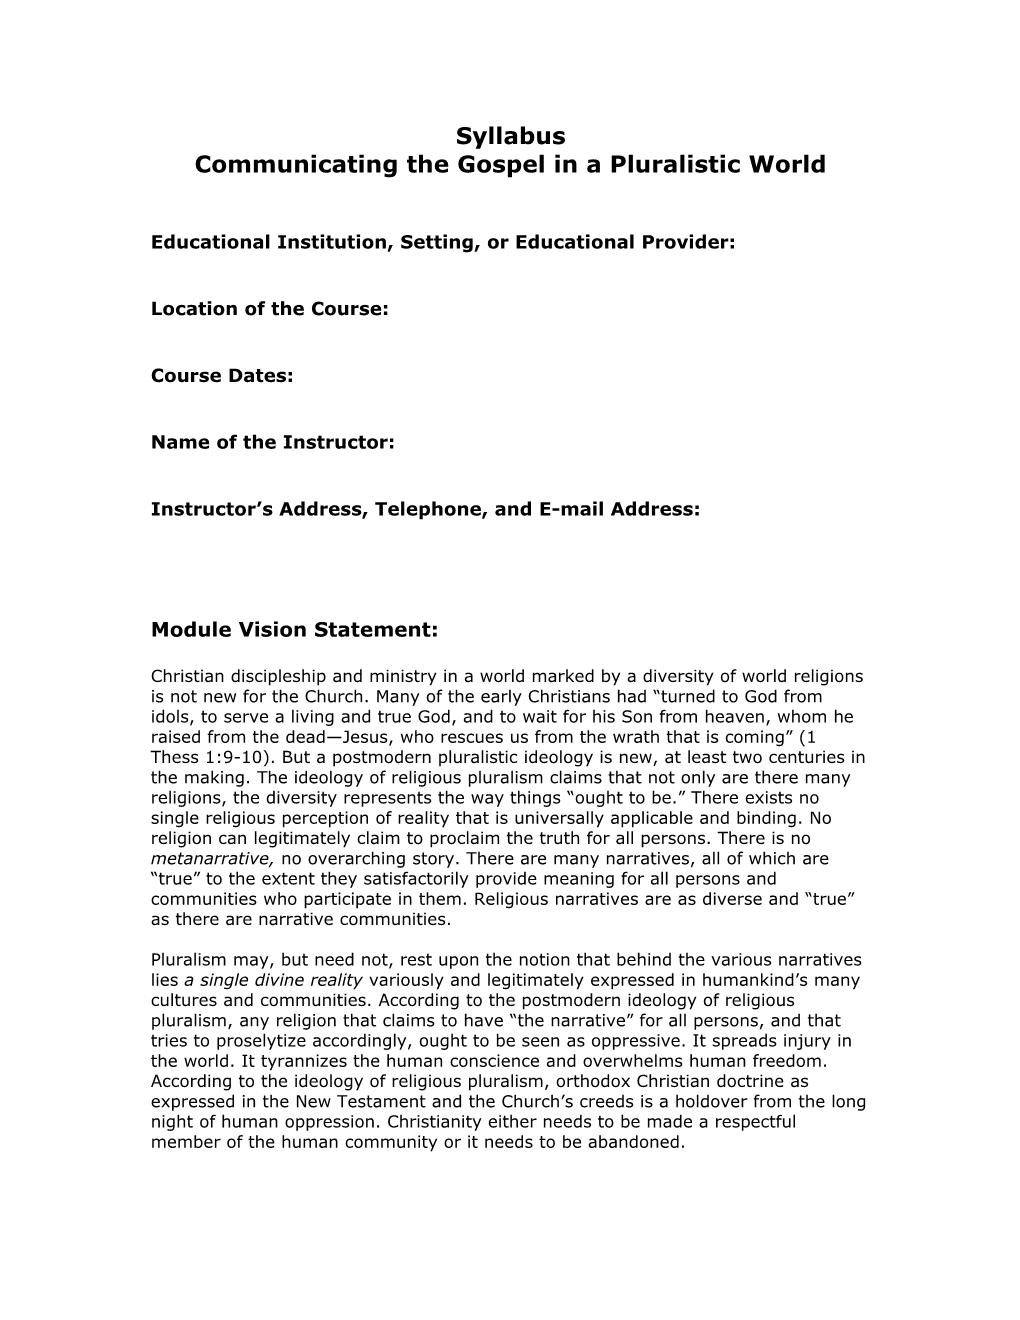 Communicating the Gospel in a Pluralistic World